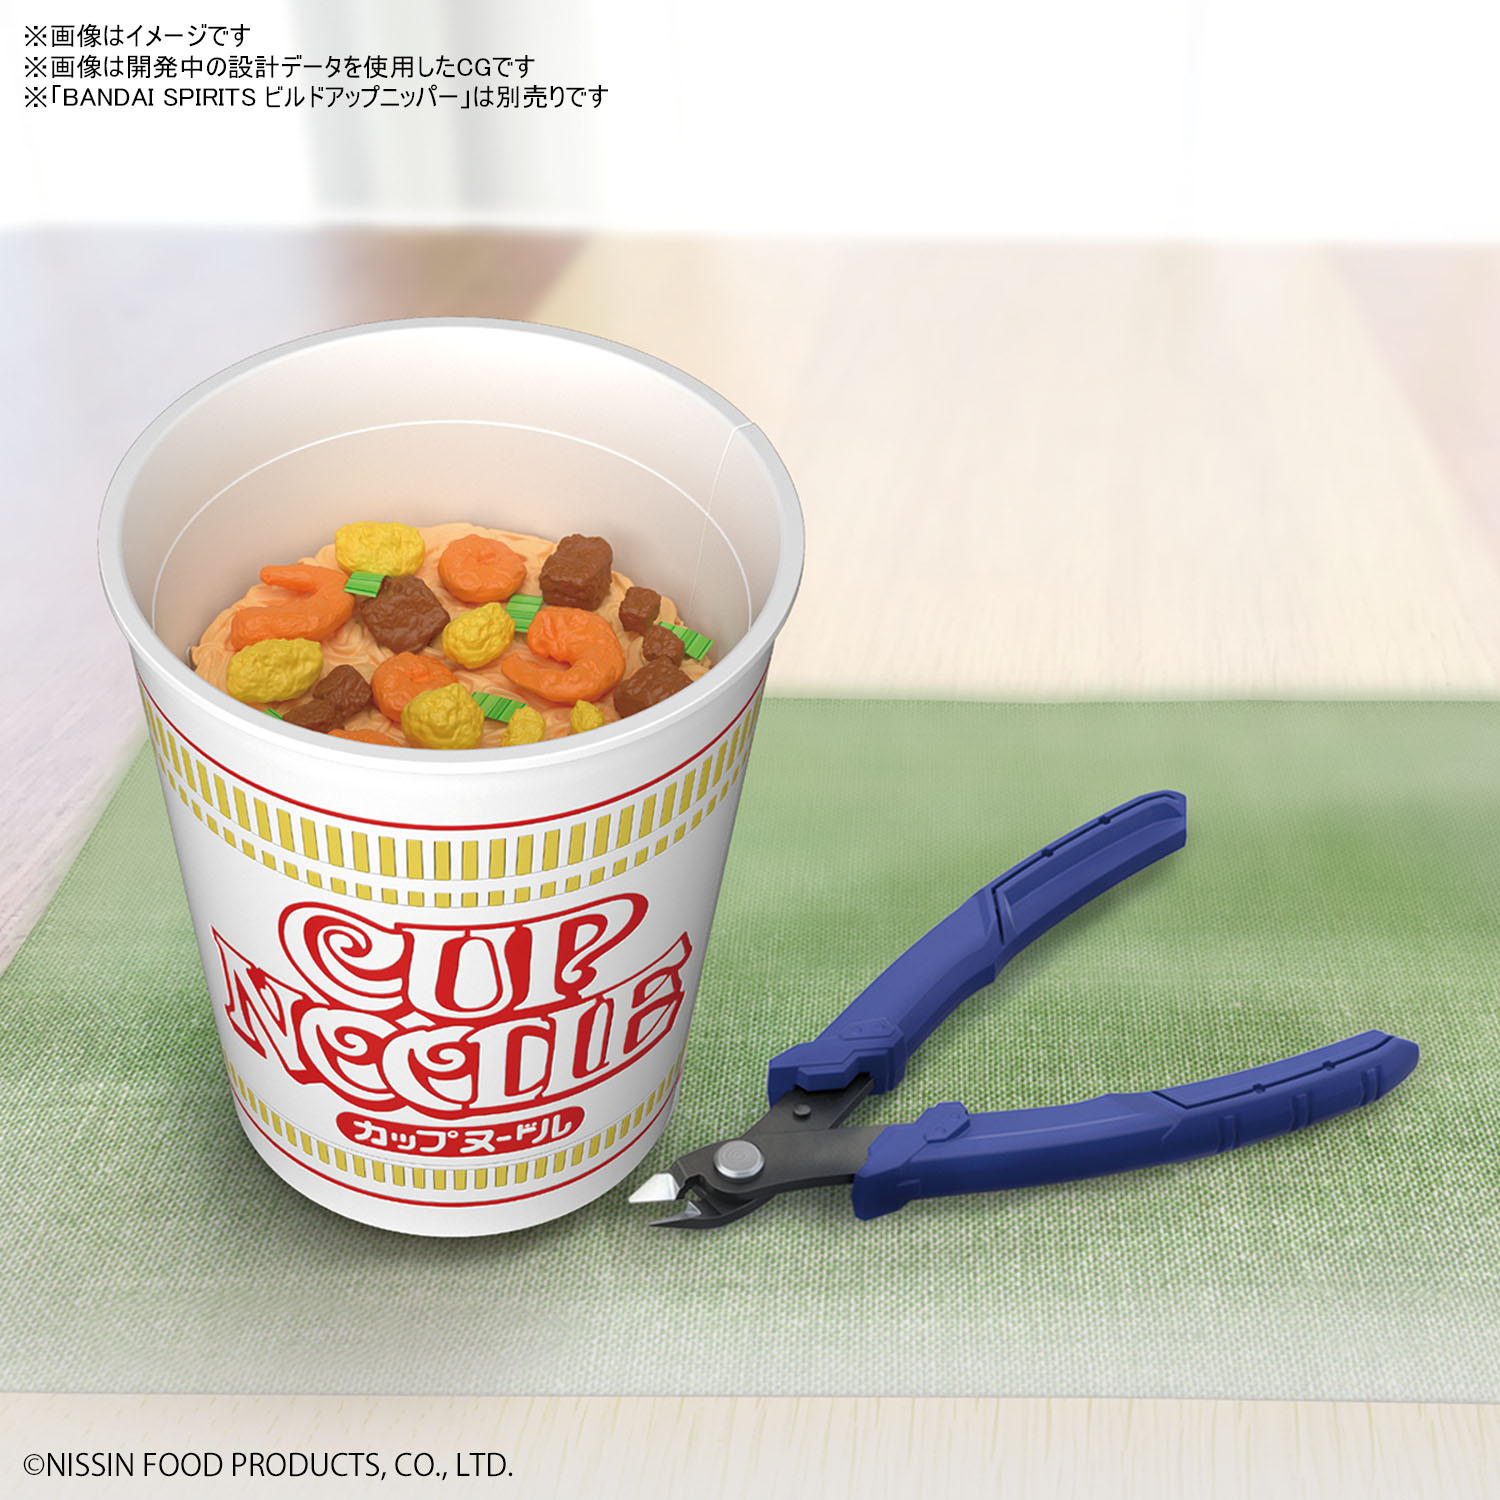 Super Realistic Nissin Cup Noodle Model Definitely Needs More Than 3 Minutes Grape Japan